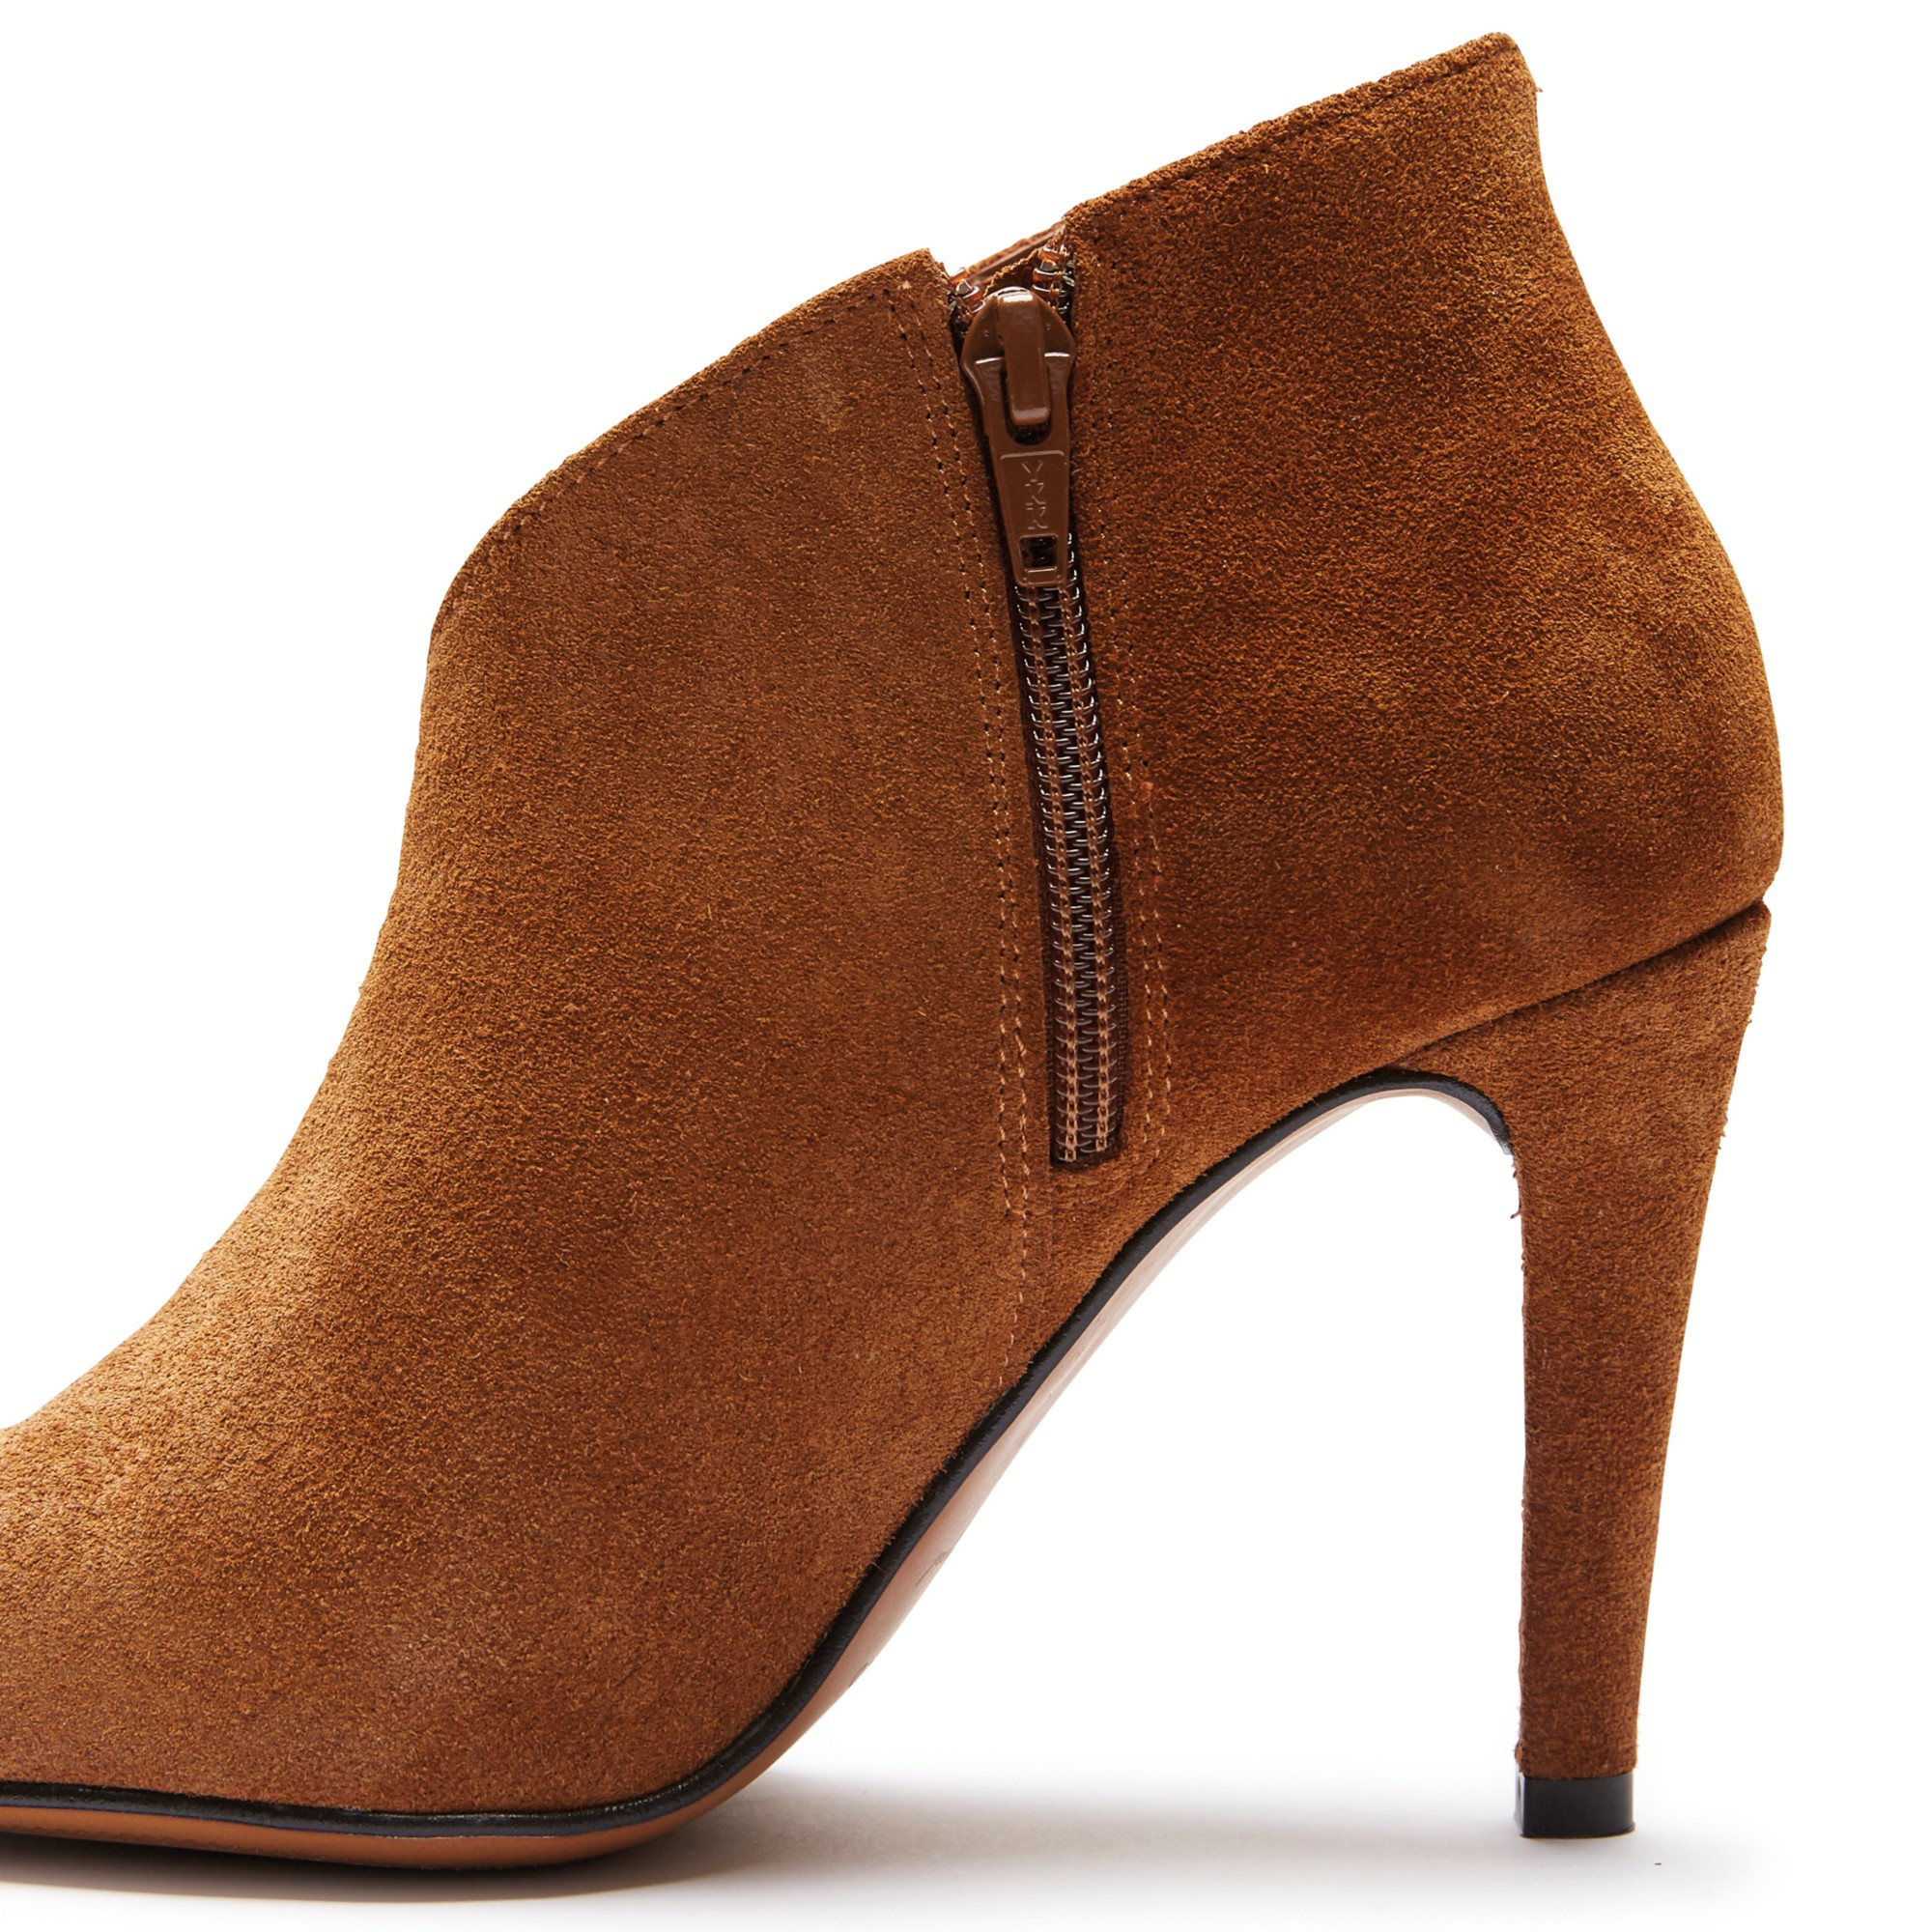 Selected Femme Cognac Suede Alexandria Cut Away Stiletto Heeled Ankle Boots Brown Product 1 683501396 Normal 